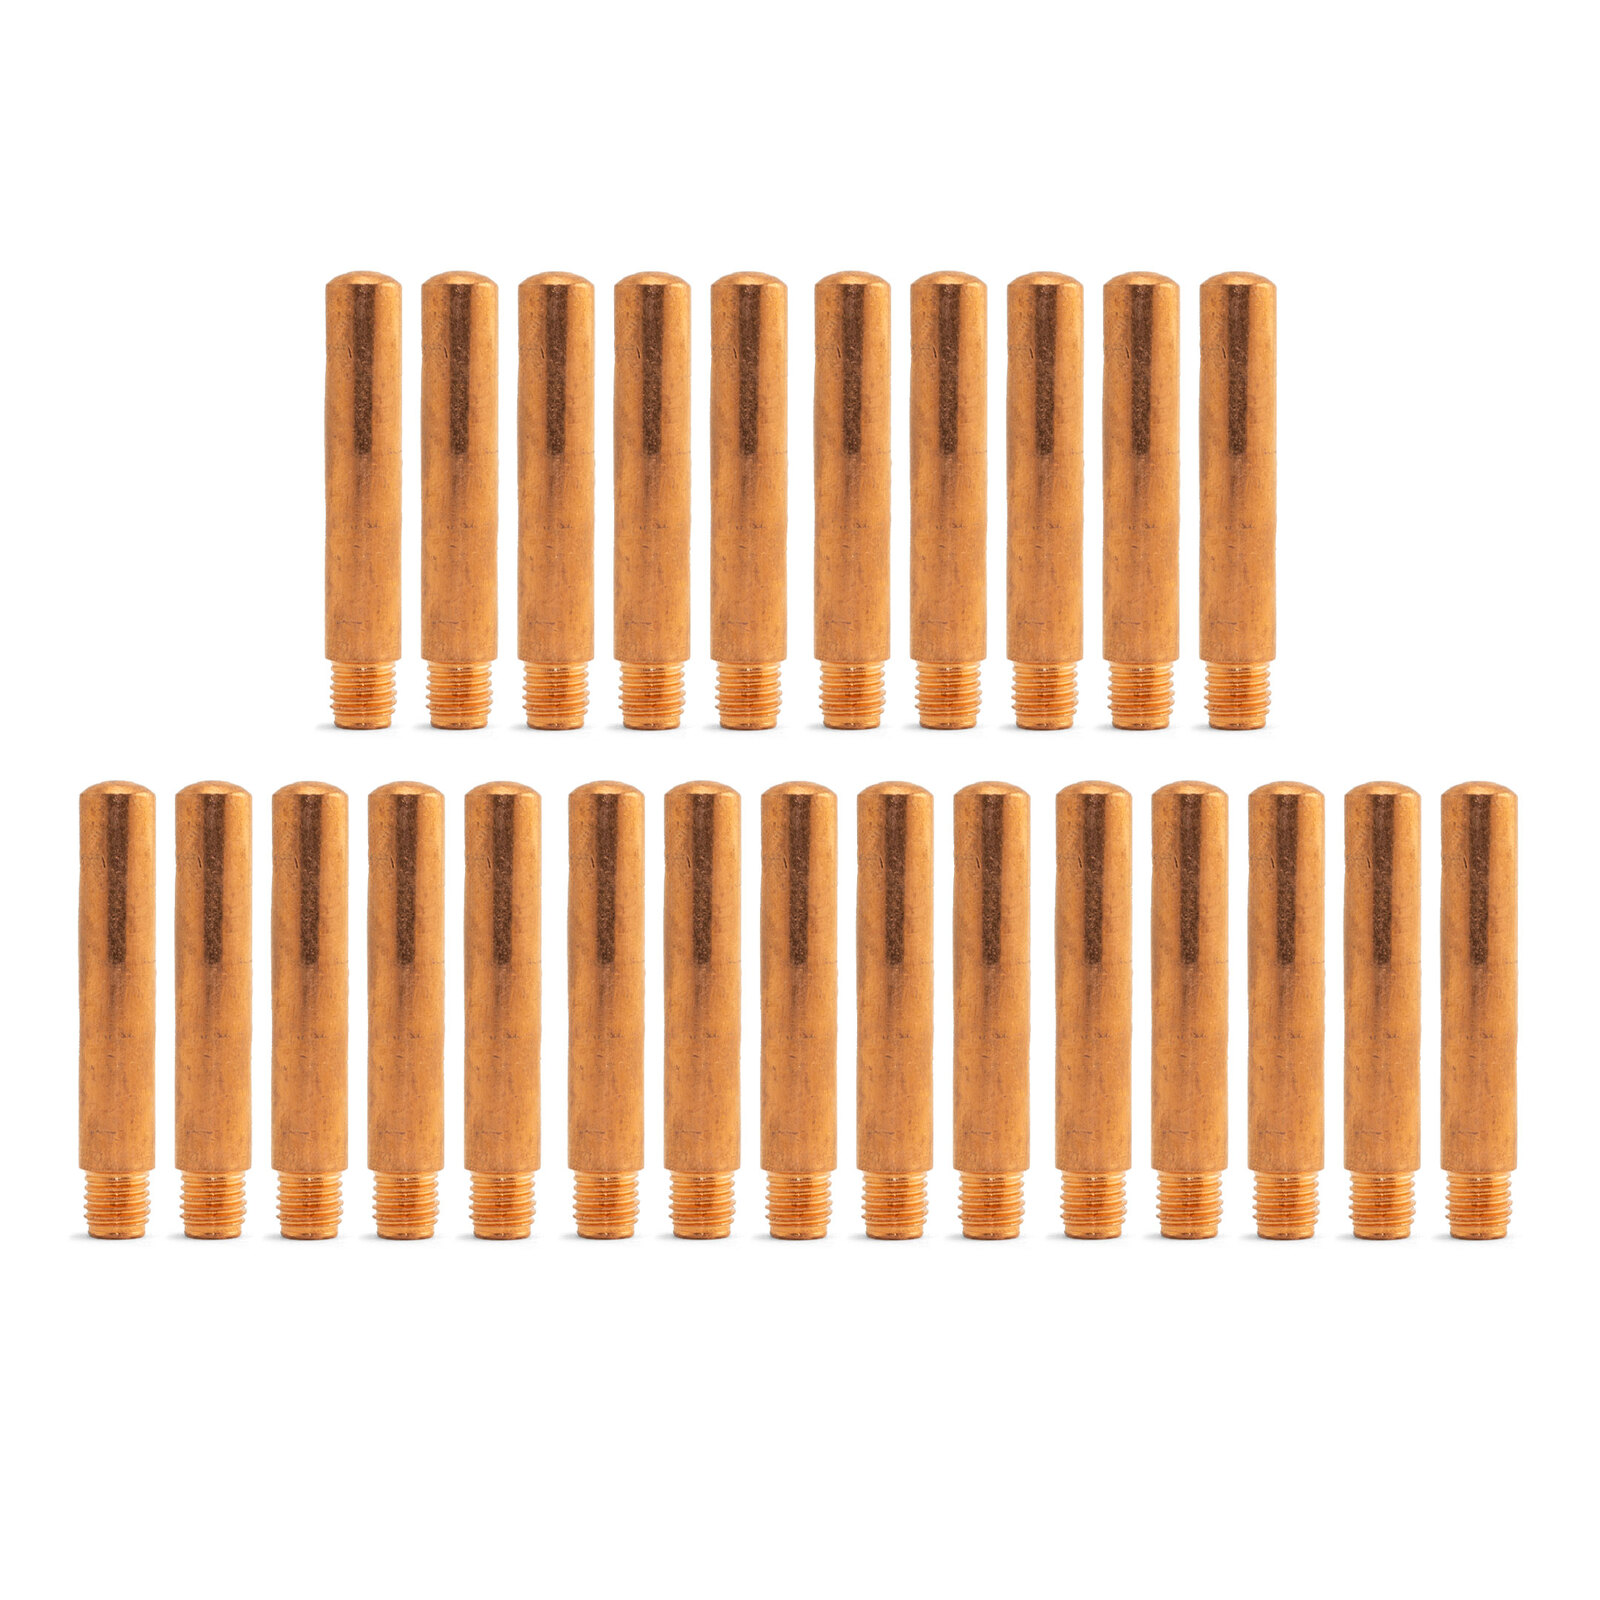 Tweco #5 Style 15H40 MIG Contact Tips - 1.0mm - 25 Each